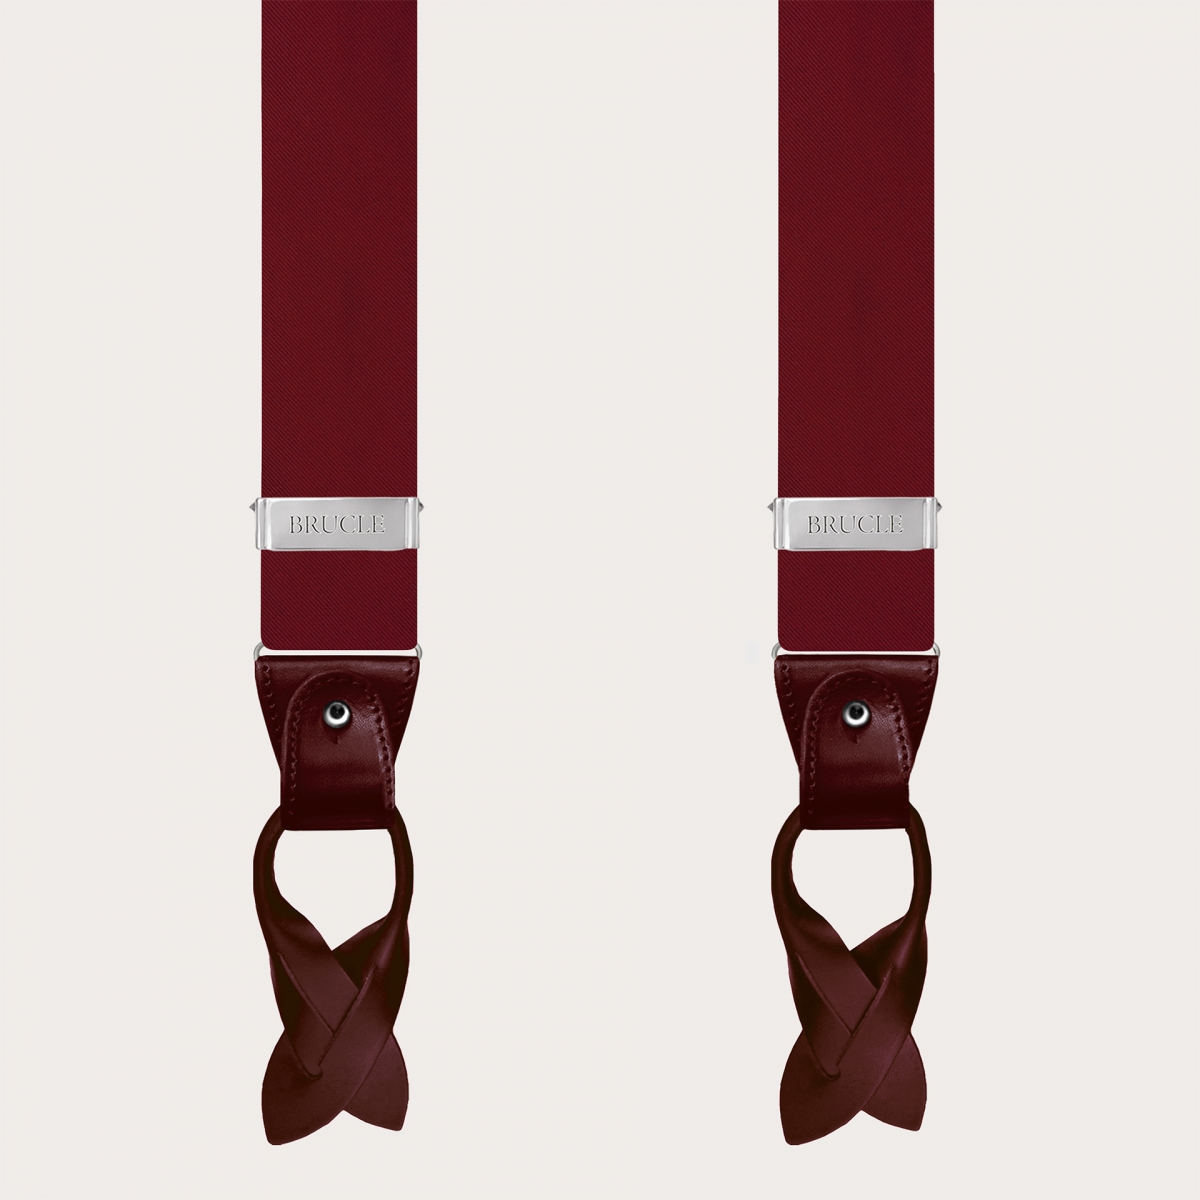 Men's burgundy suspenders in double-use silk satin, with nickel-free buttons or clips